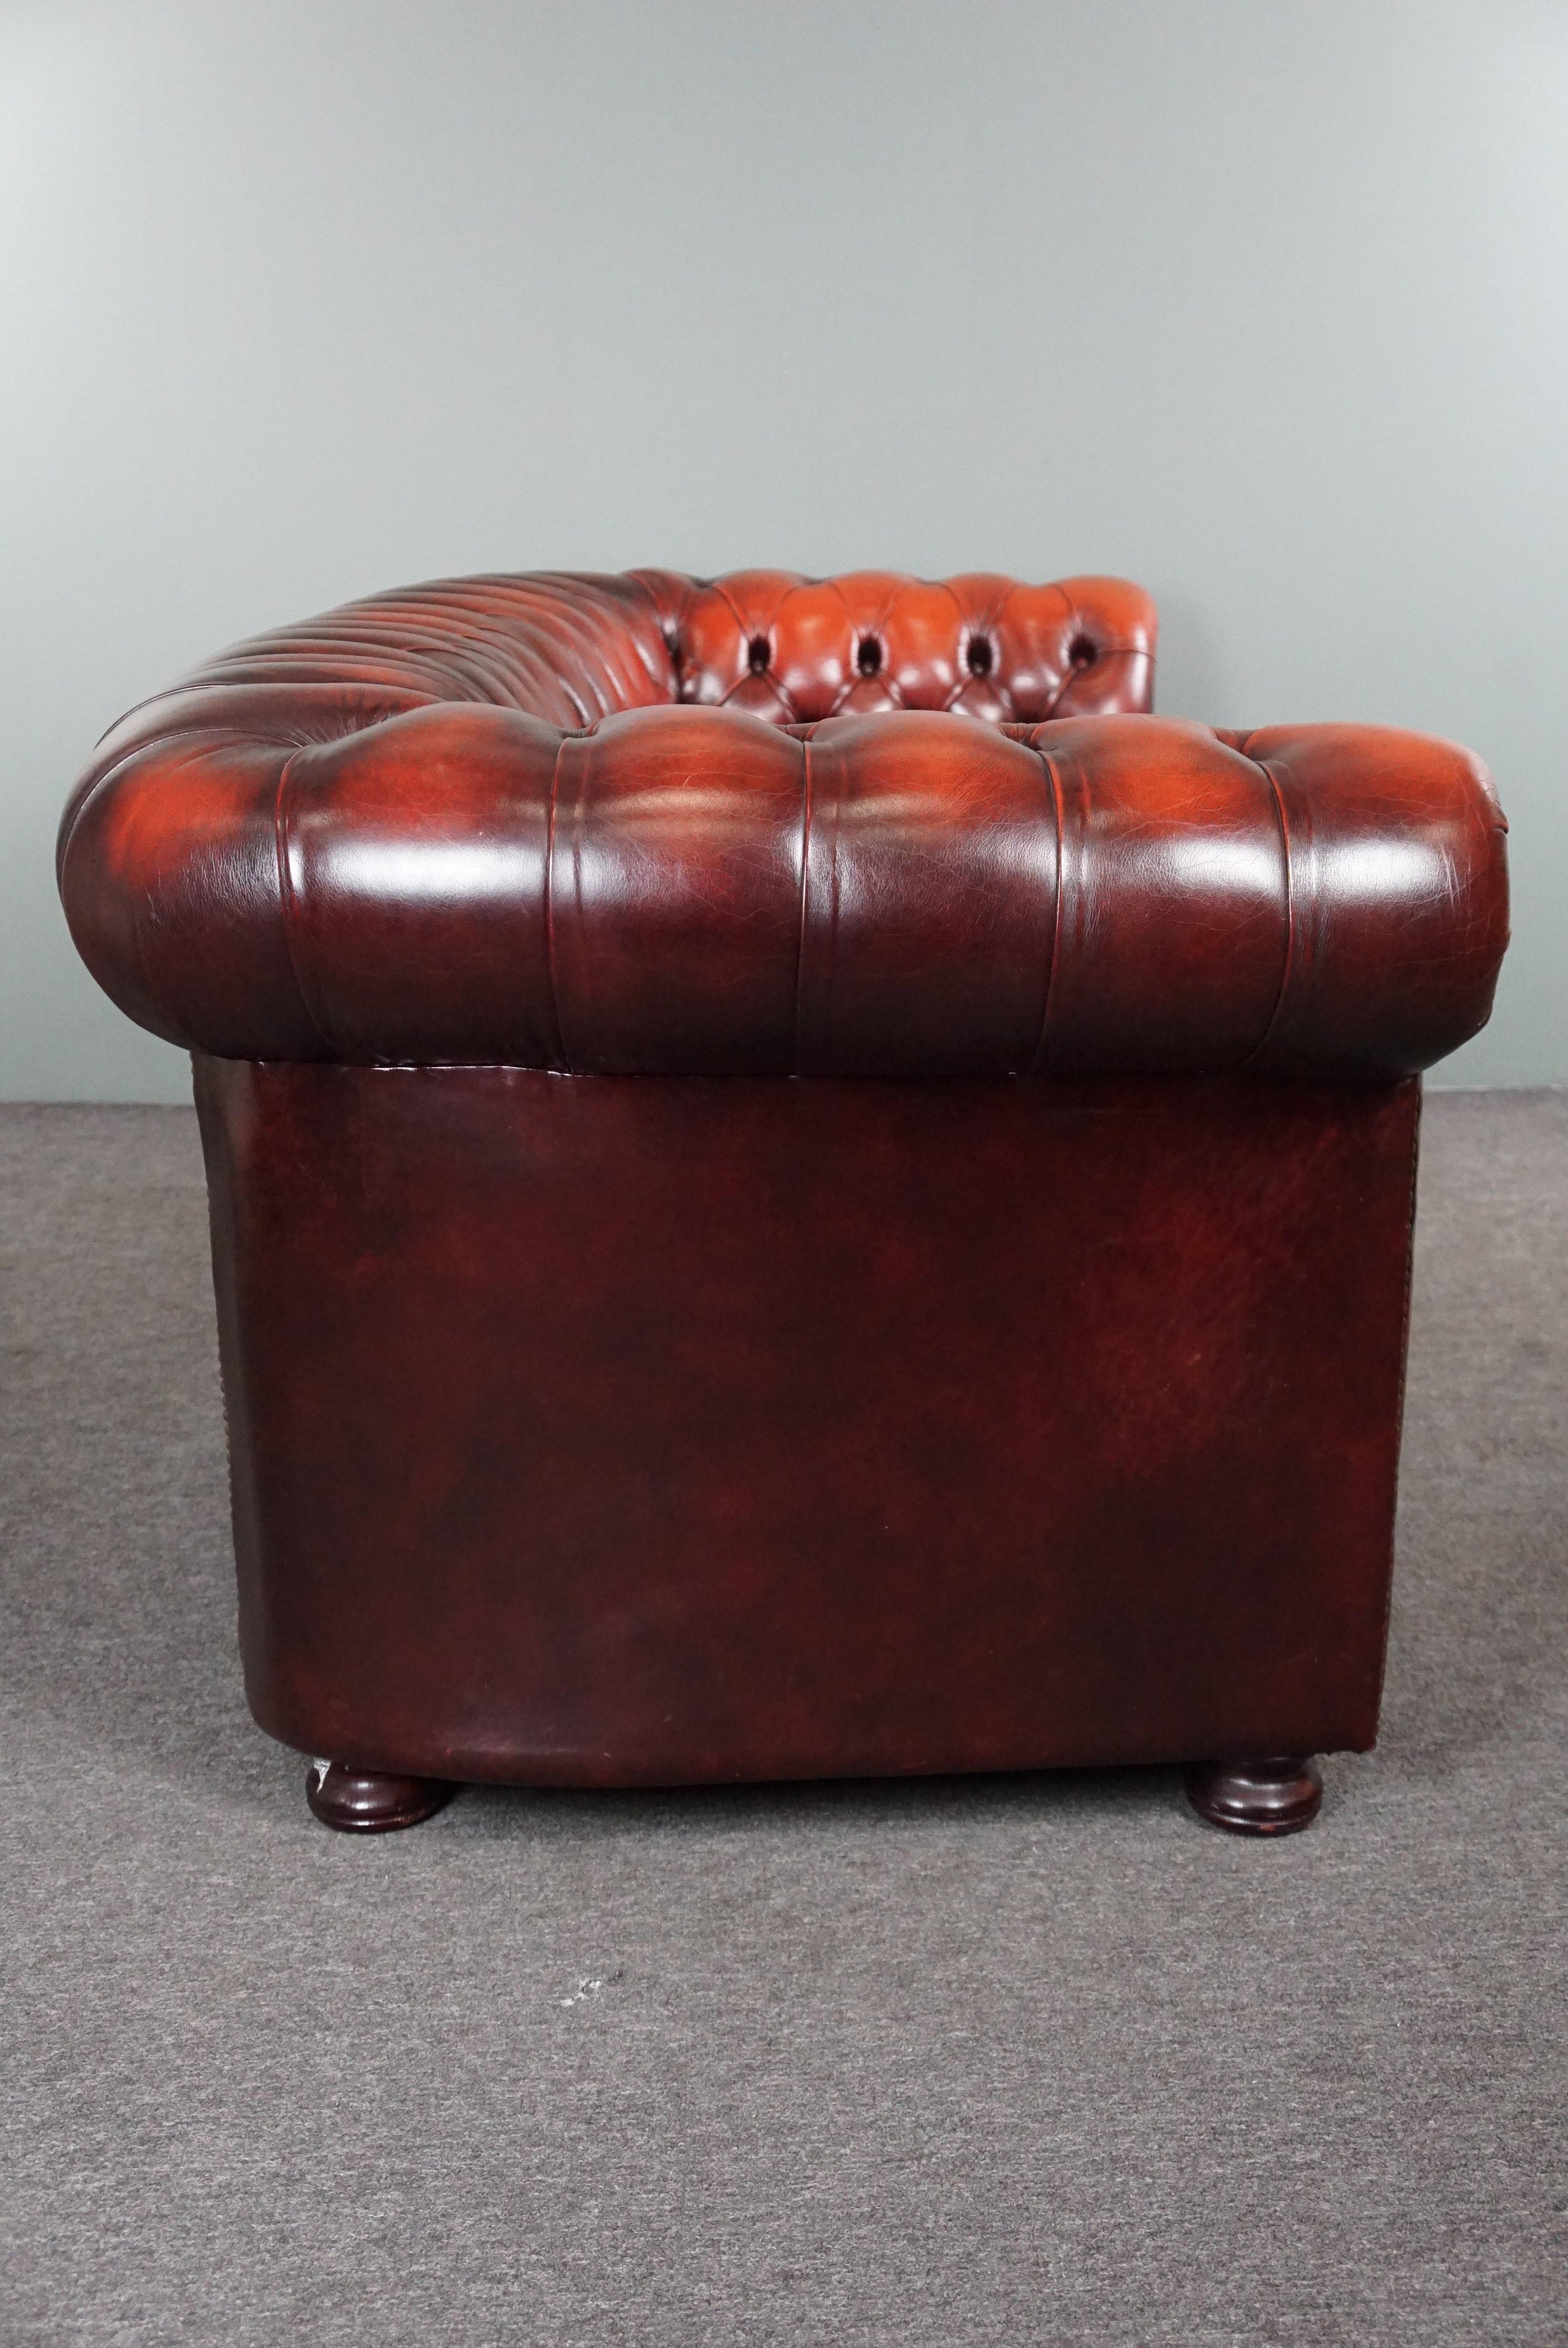 Offered is this wonderfully sitting, vividly colored cowhide 2.5/3 seat Chesterfield sofa.

This deeply colored red Chesterfield sofa has a padded back and armrests and is beautifully finished with decorative nails, which gives it a timeless look.